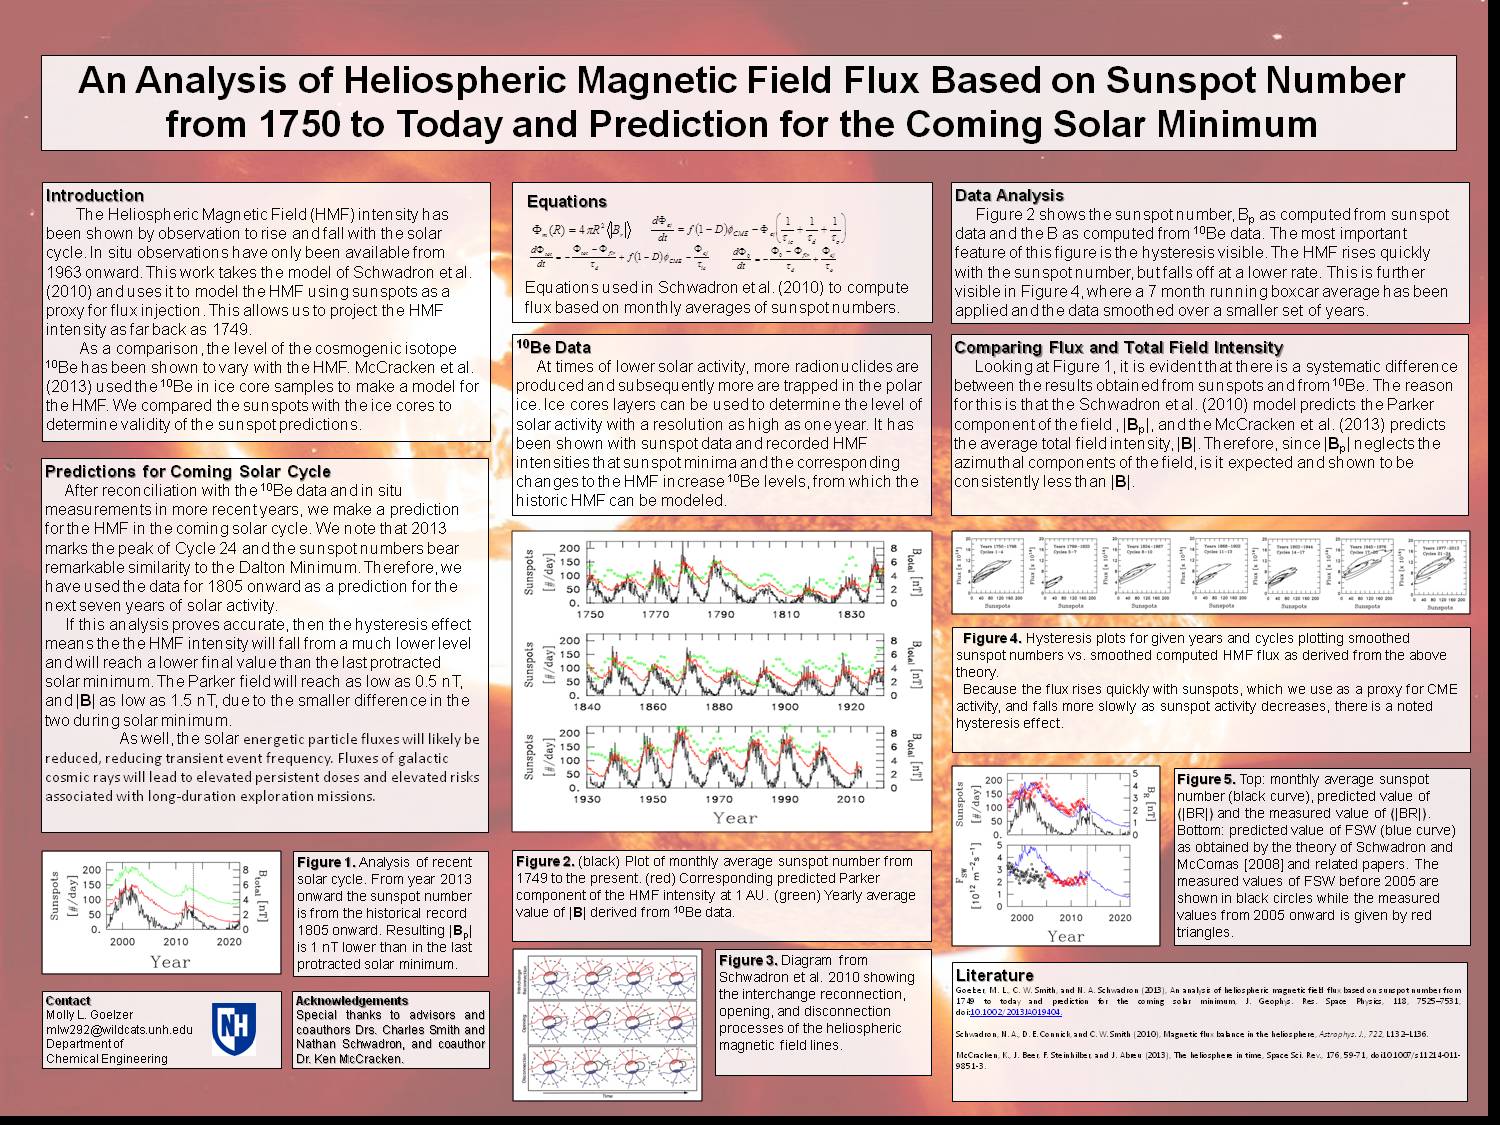 Heliospheric Magnetic Flux by CWSmith